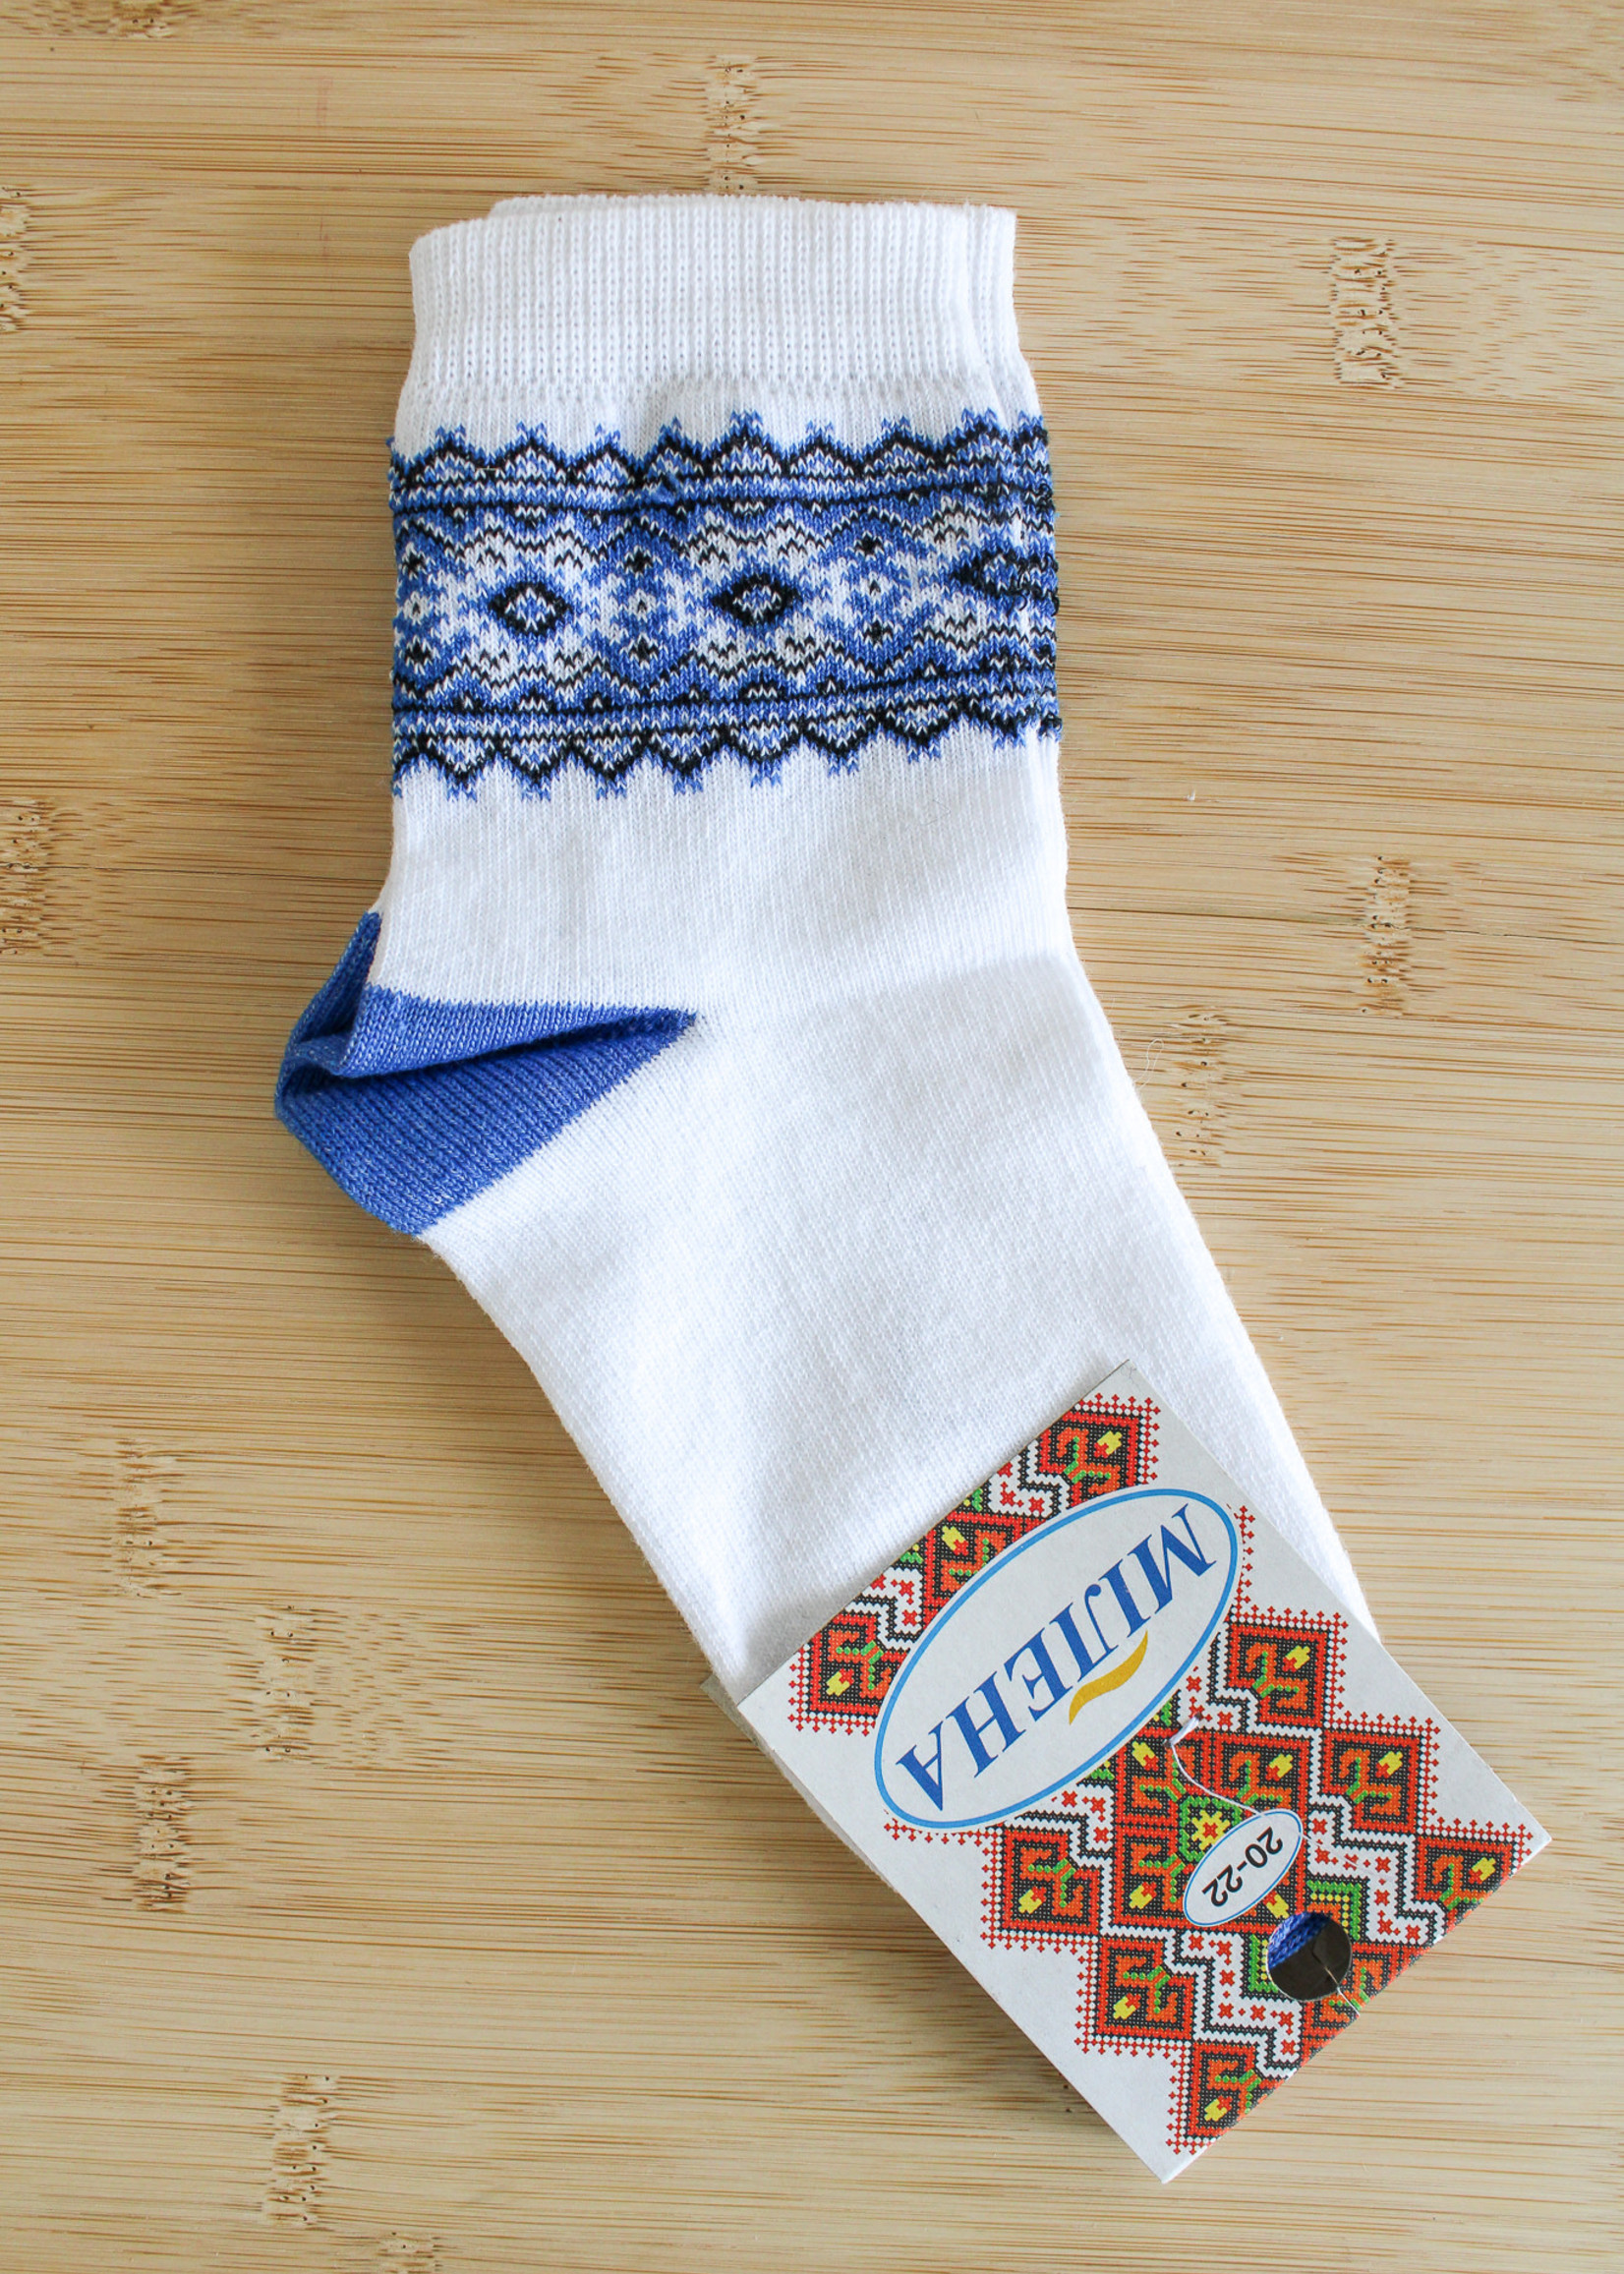 KIDS -White Socks with Blue Embroidery